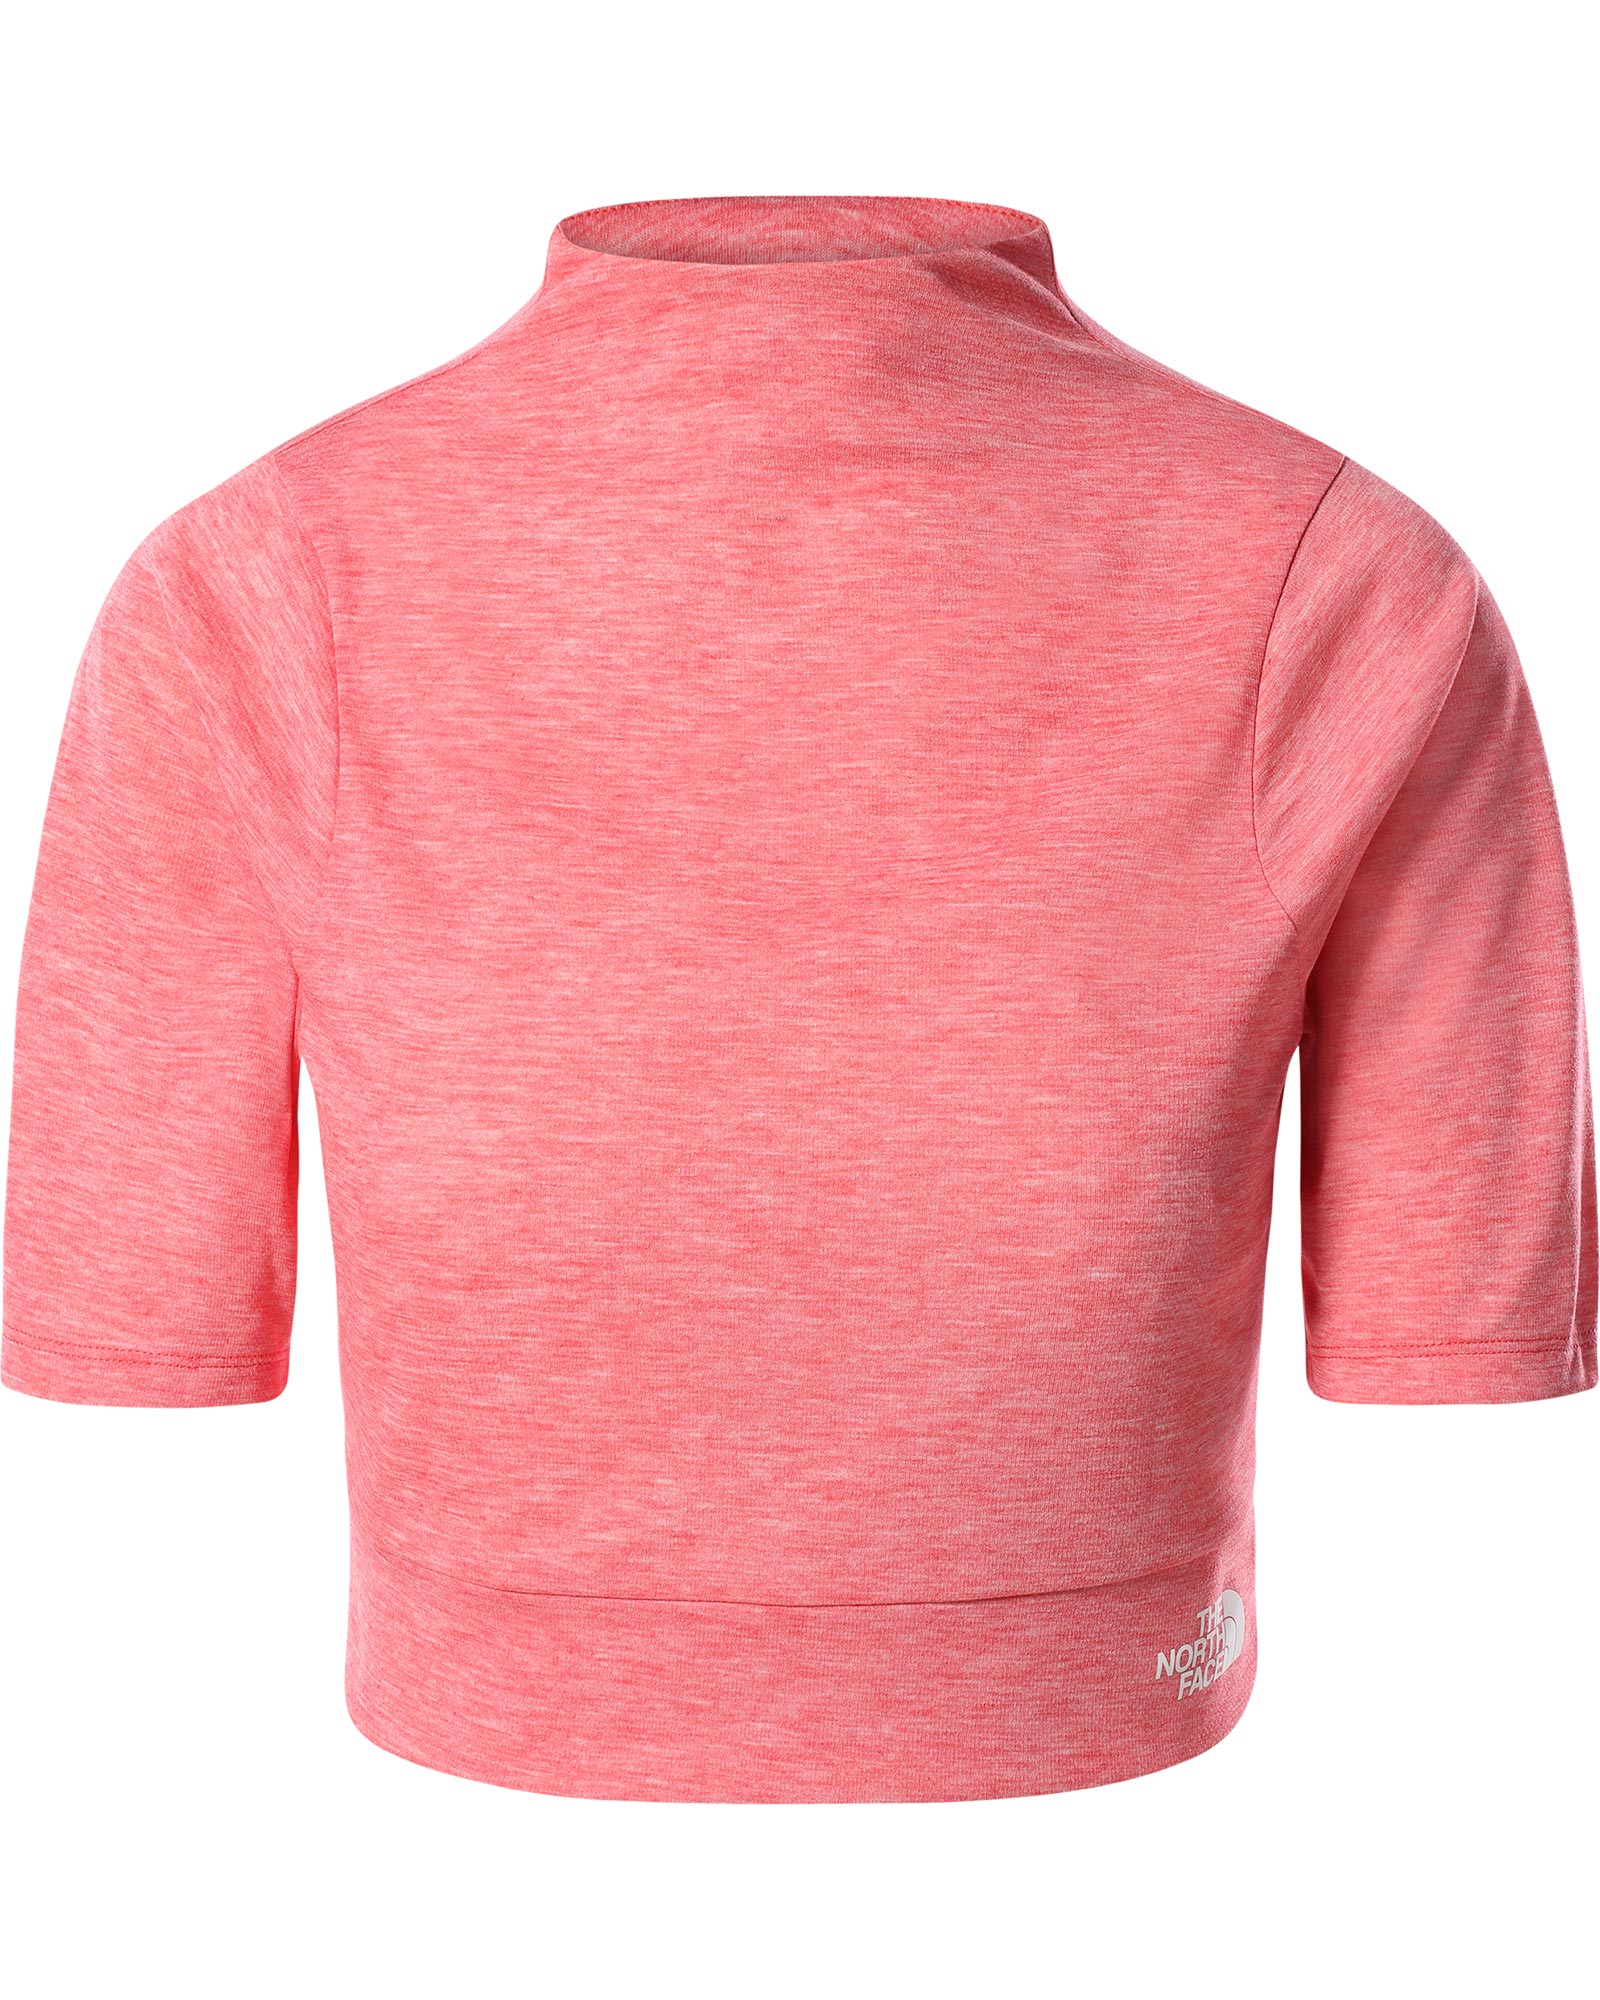 The North Face Vyrtue Women’s Crop Top - Horizon Red Heather S